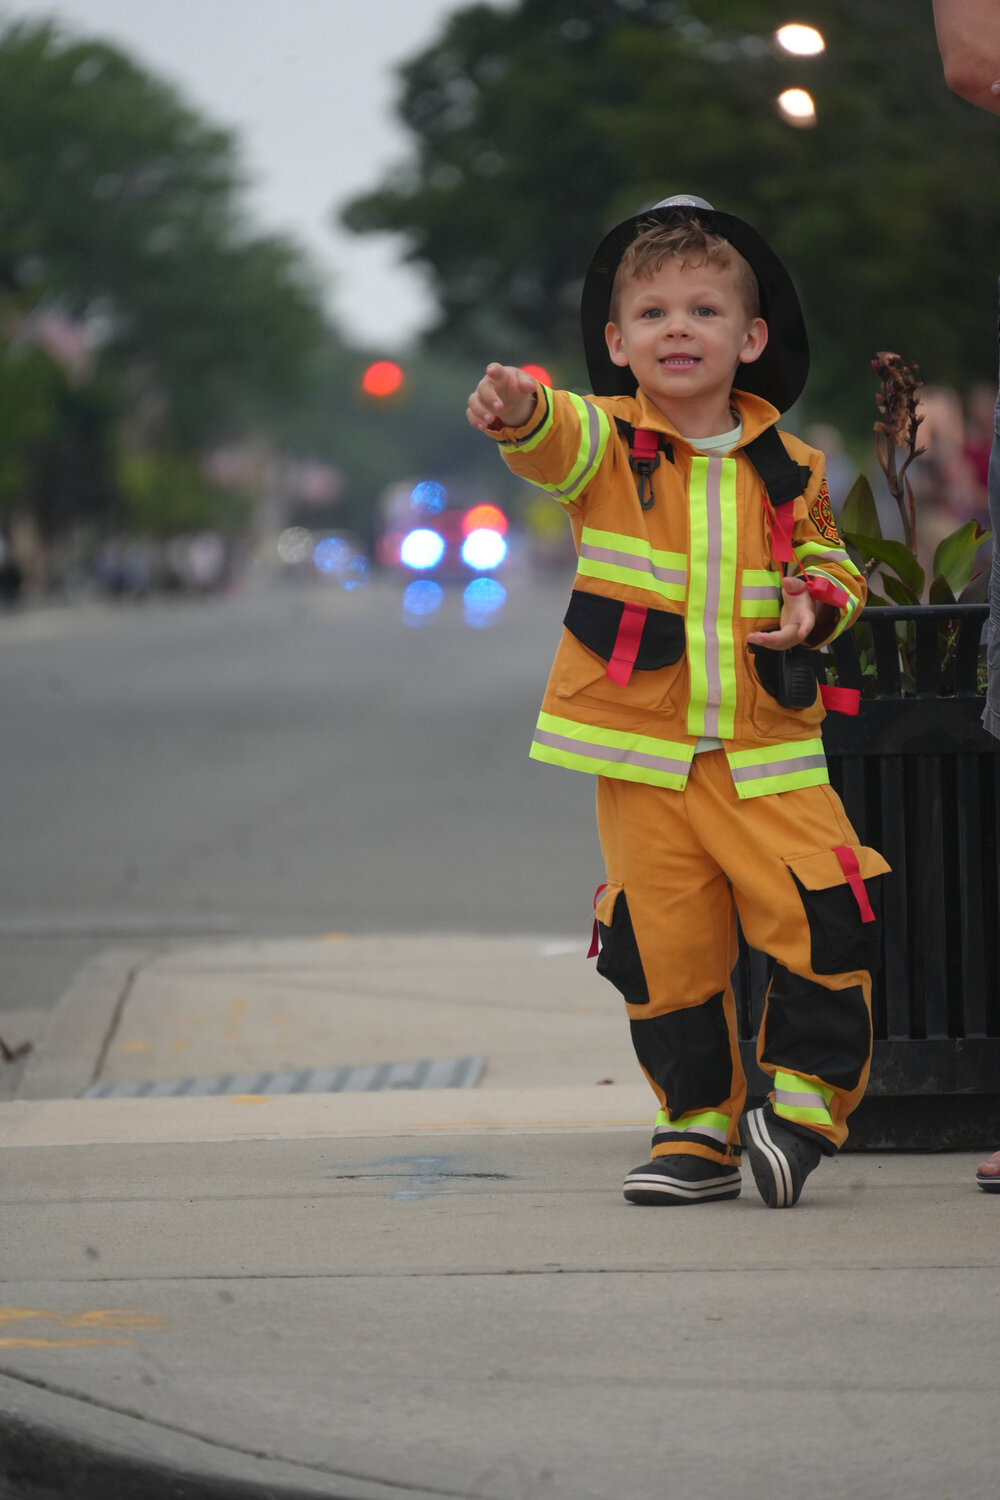 Adam Kulikauskas, 3, of Rockville Centre, was excited about the parade on Saturday night.